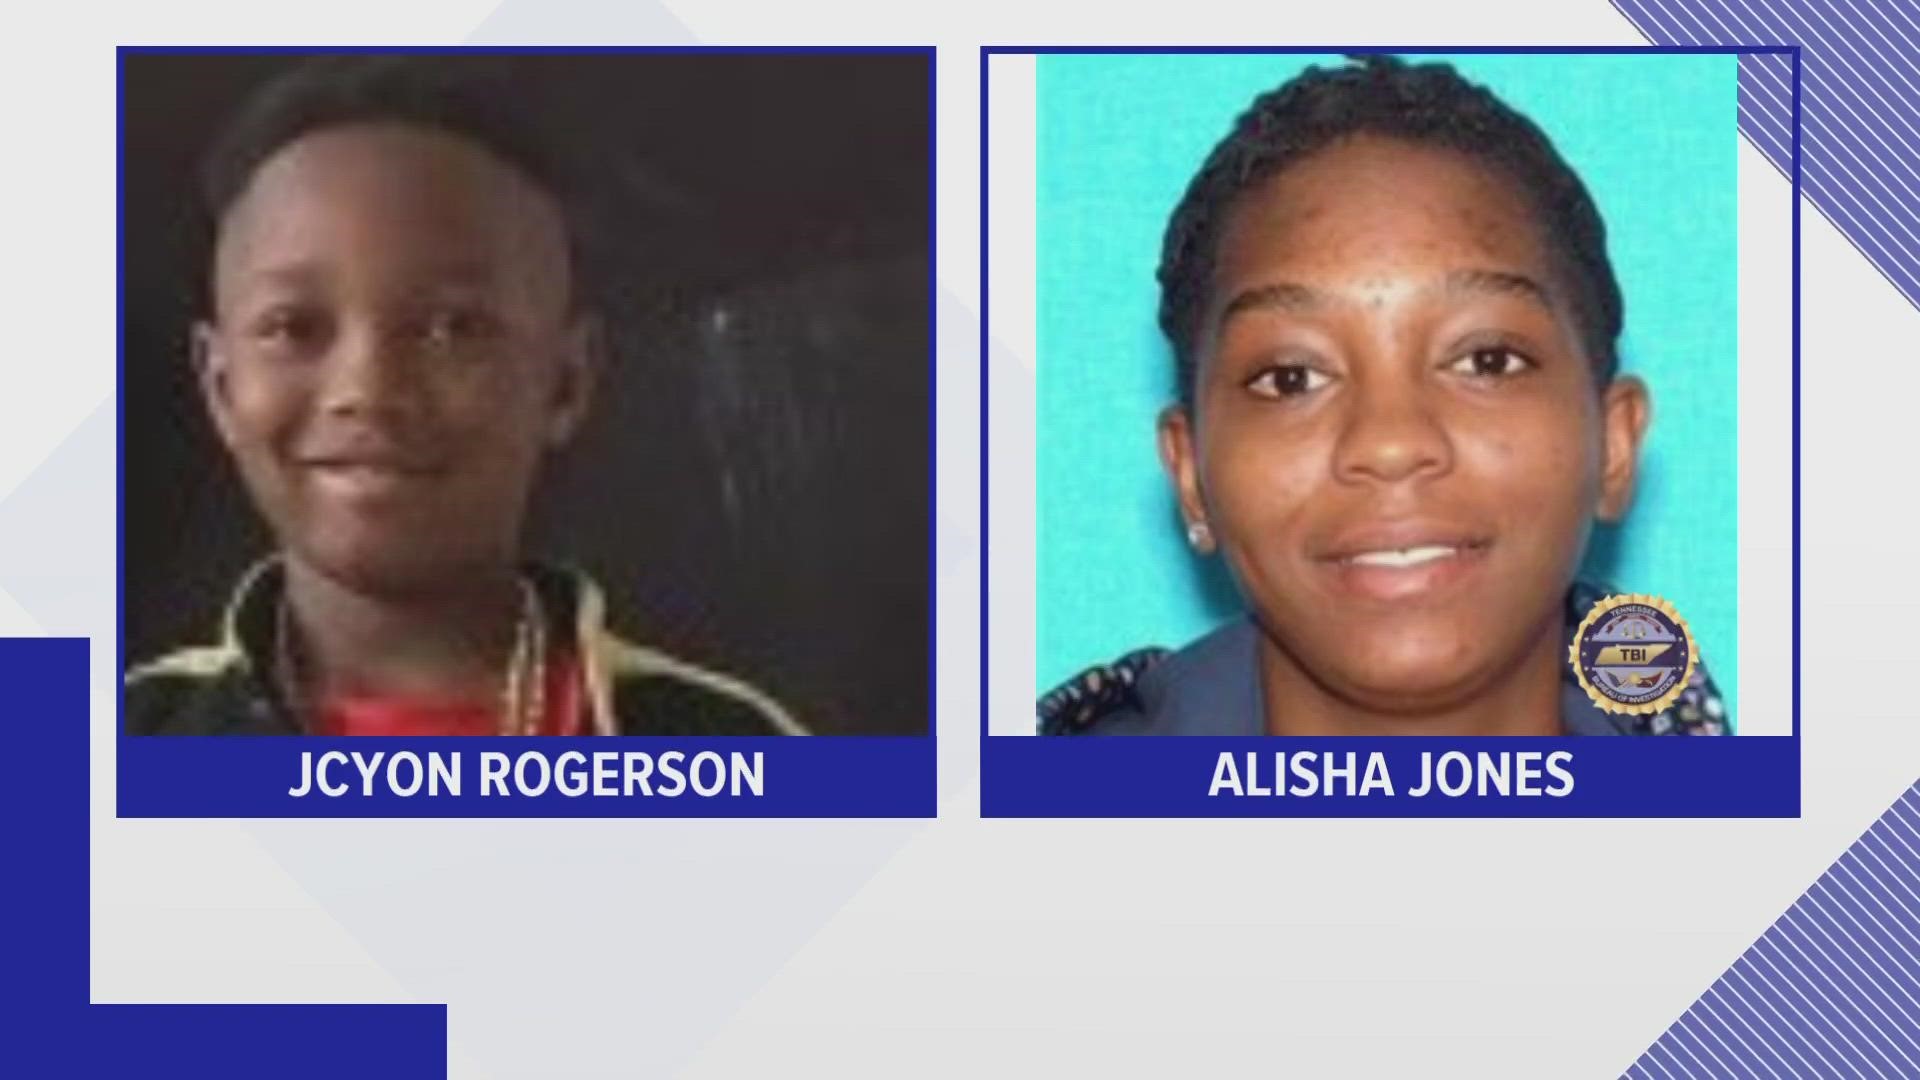 Jcyon Rogerson was believed to be with 31-year-old Alisha Jones, according to the Tennessee Bureau of Investigation.